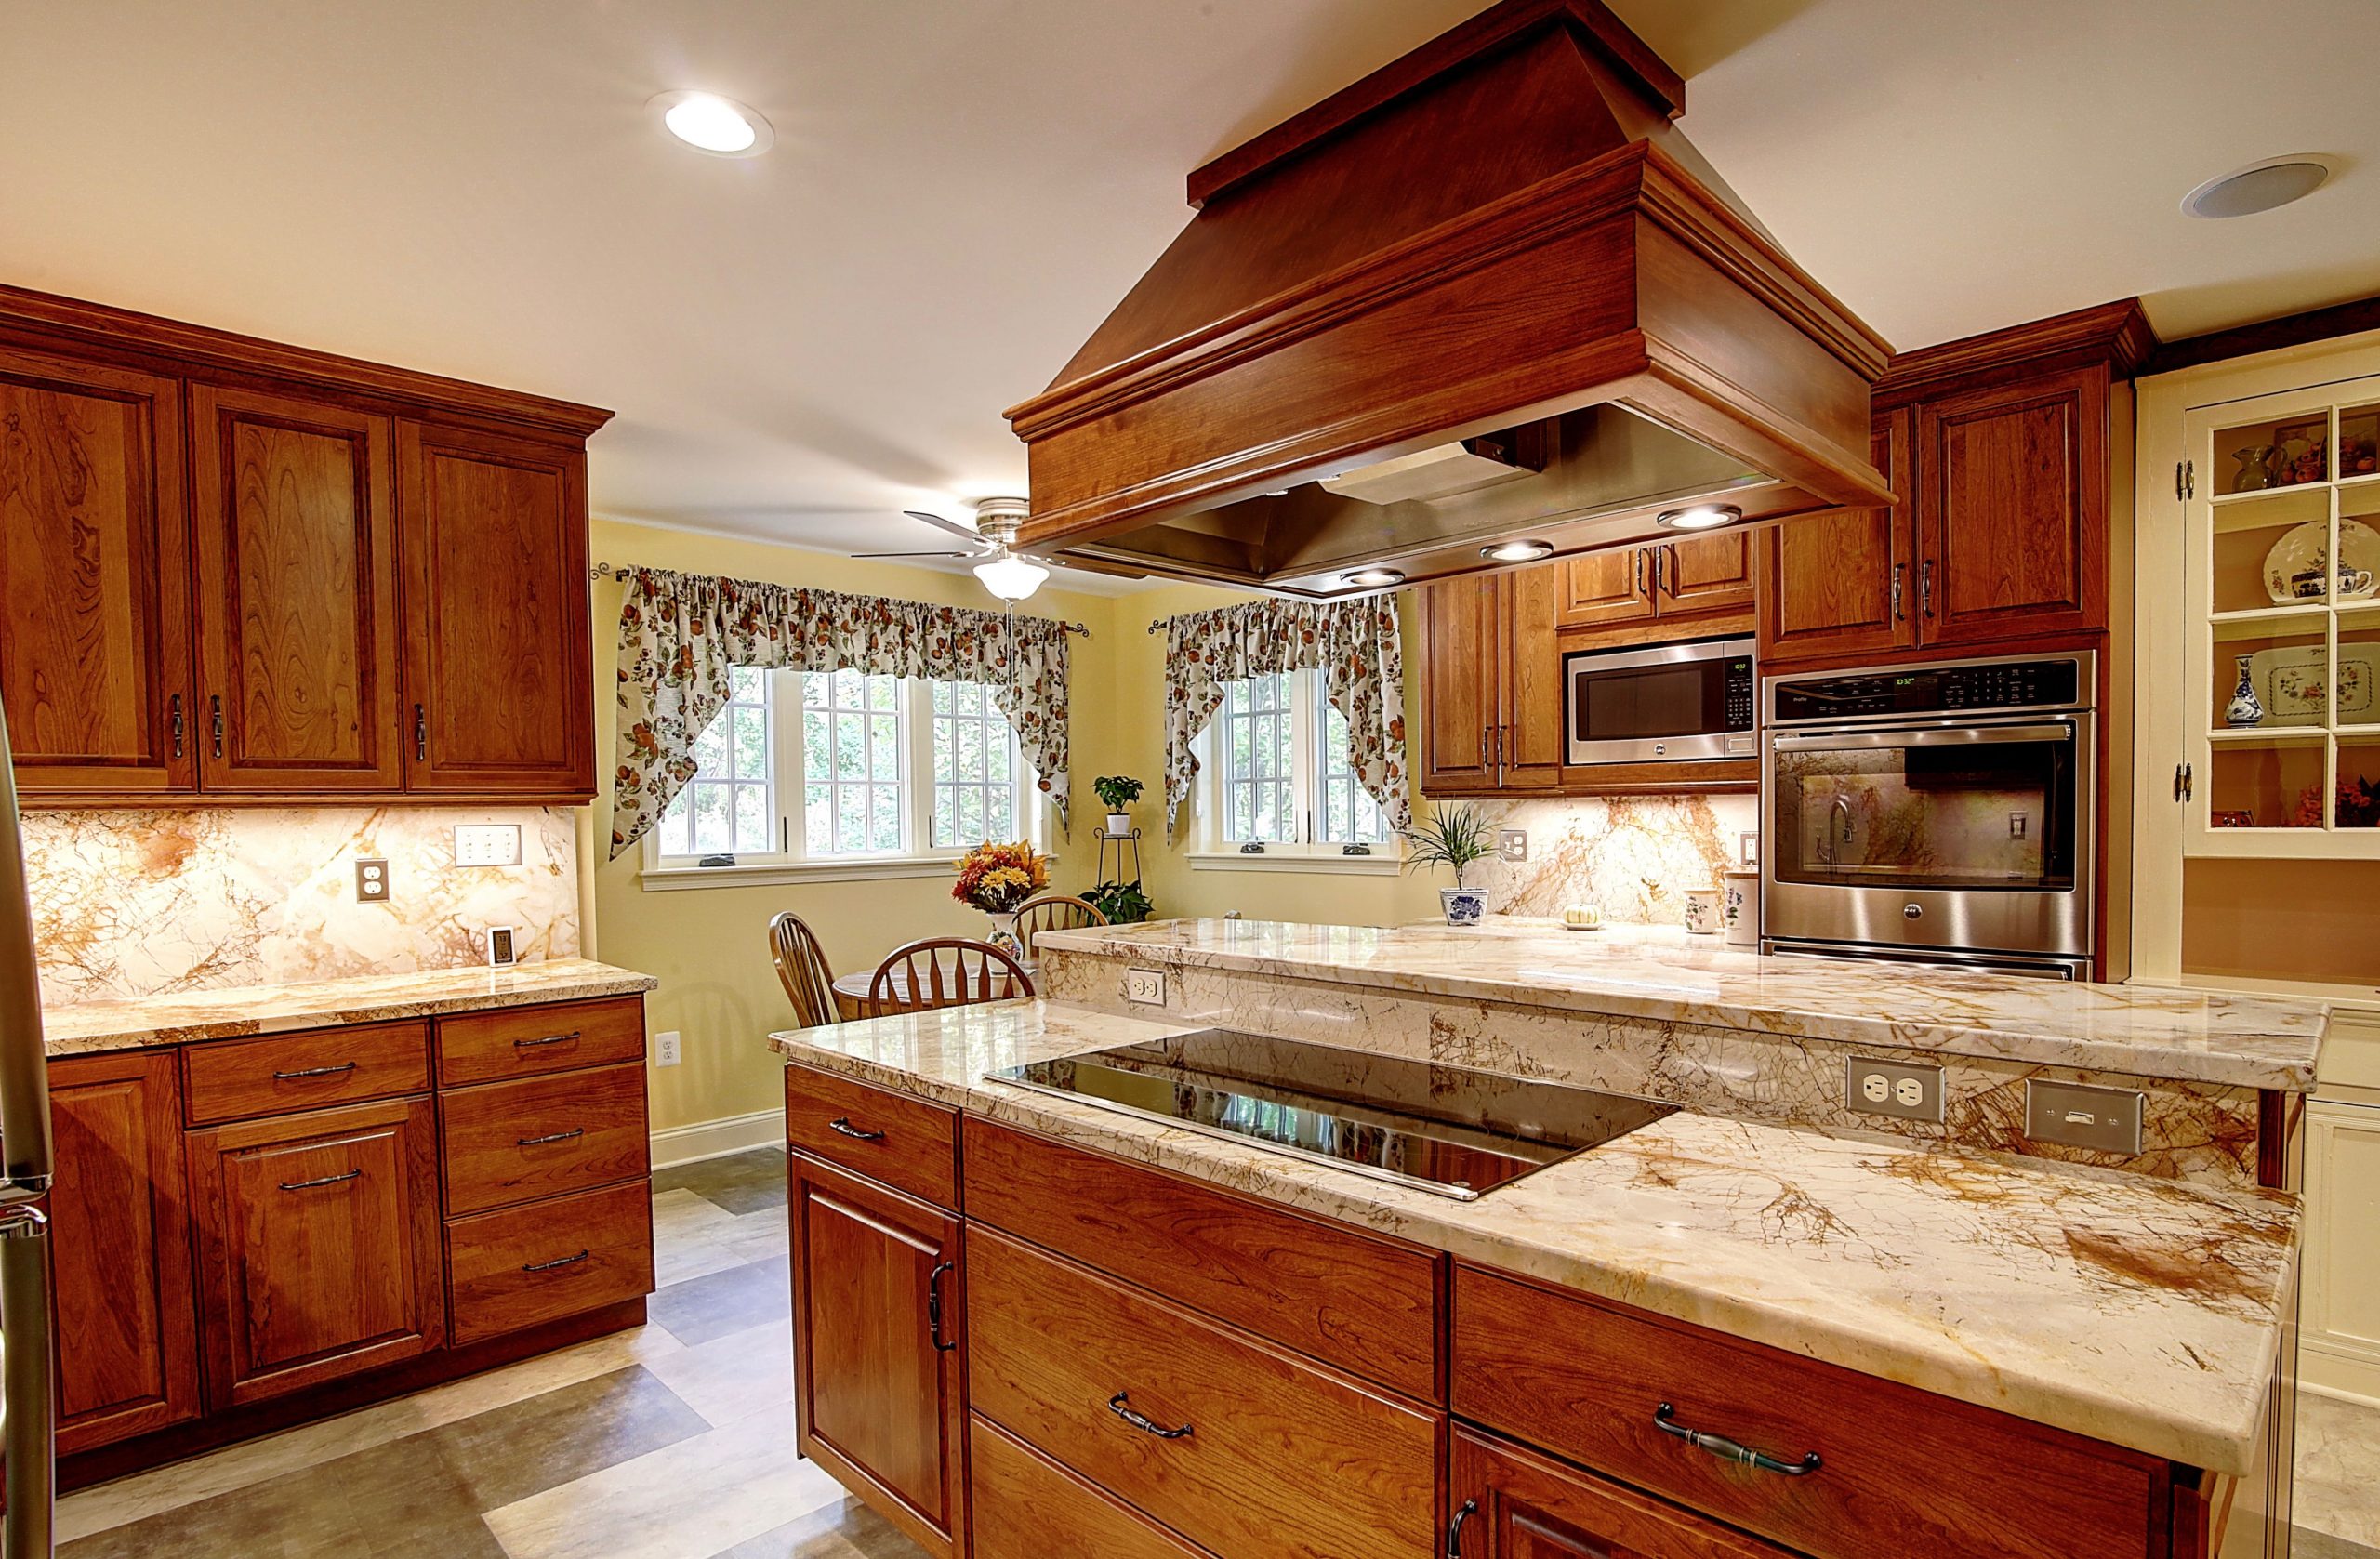 renovated kitchen with traditional wooden cabinets and center island